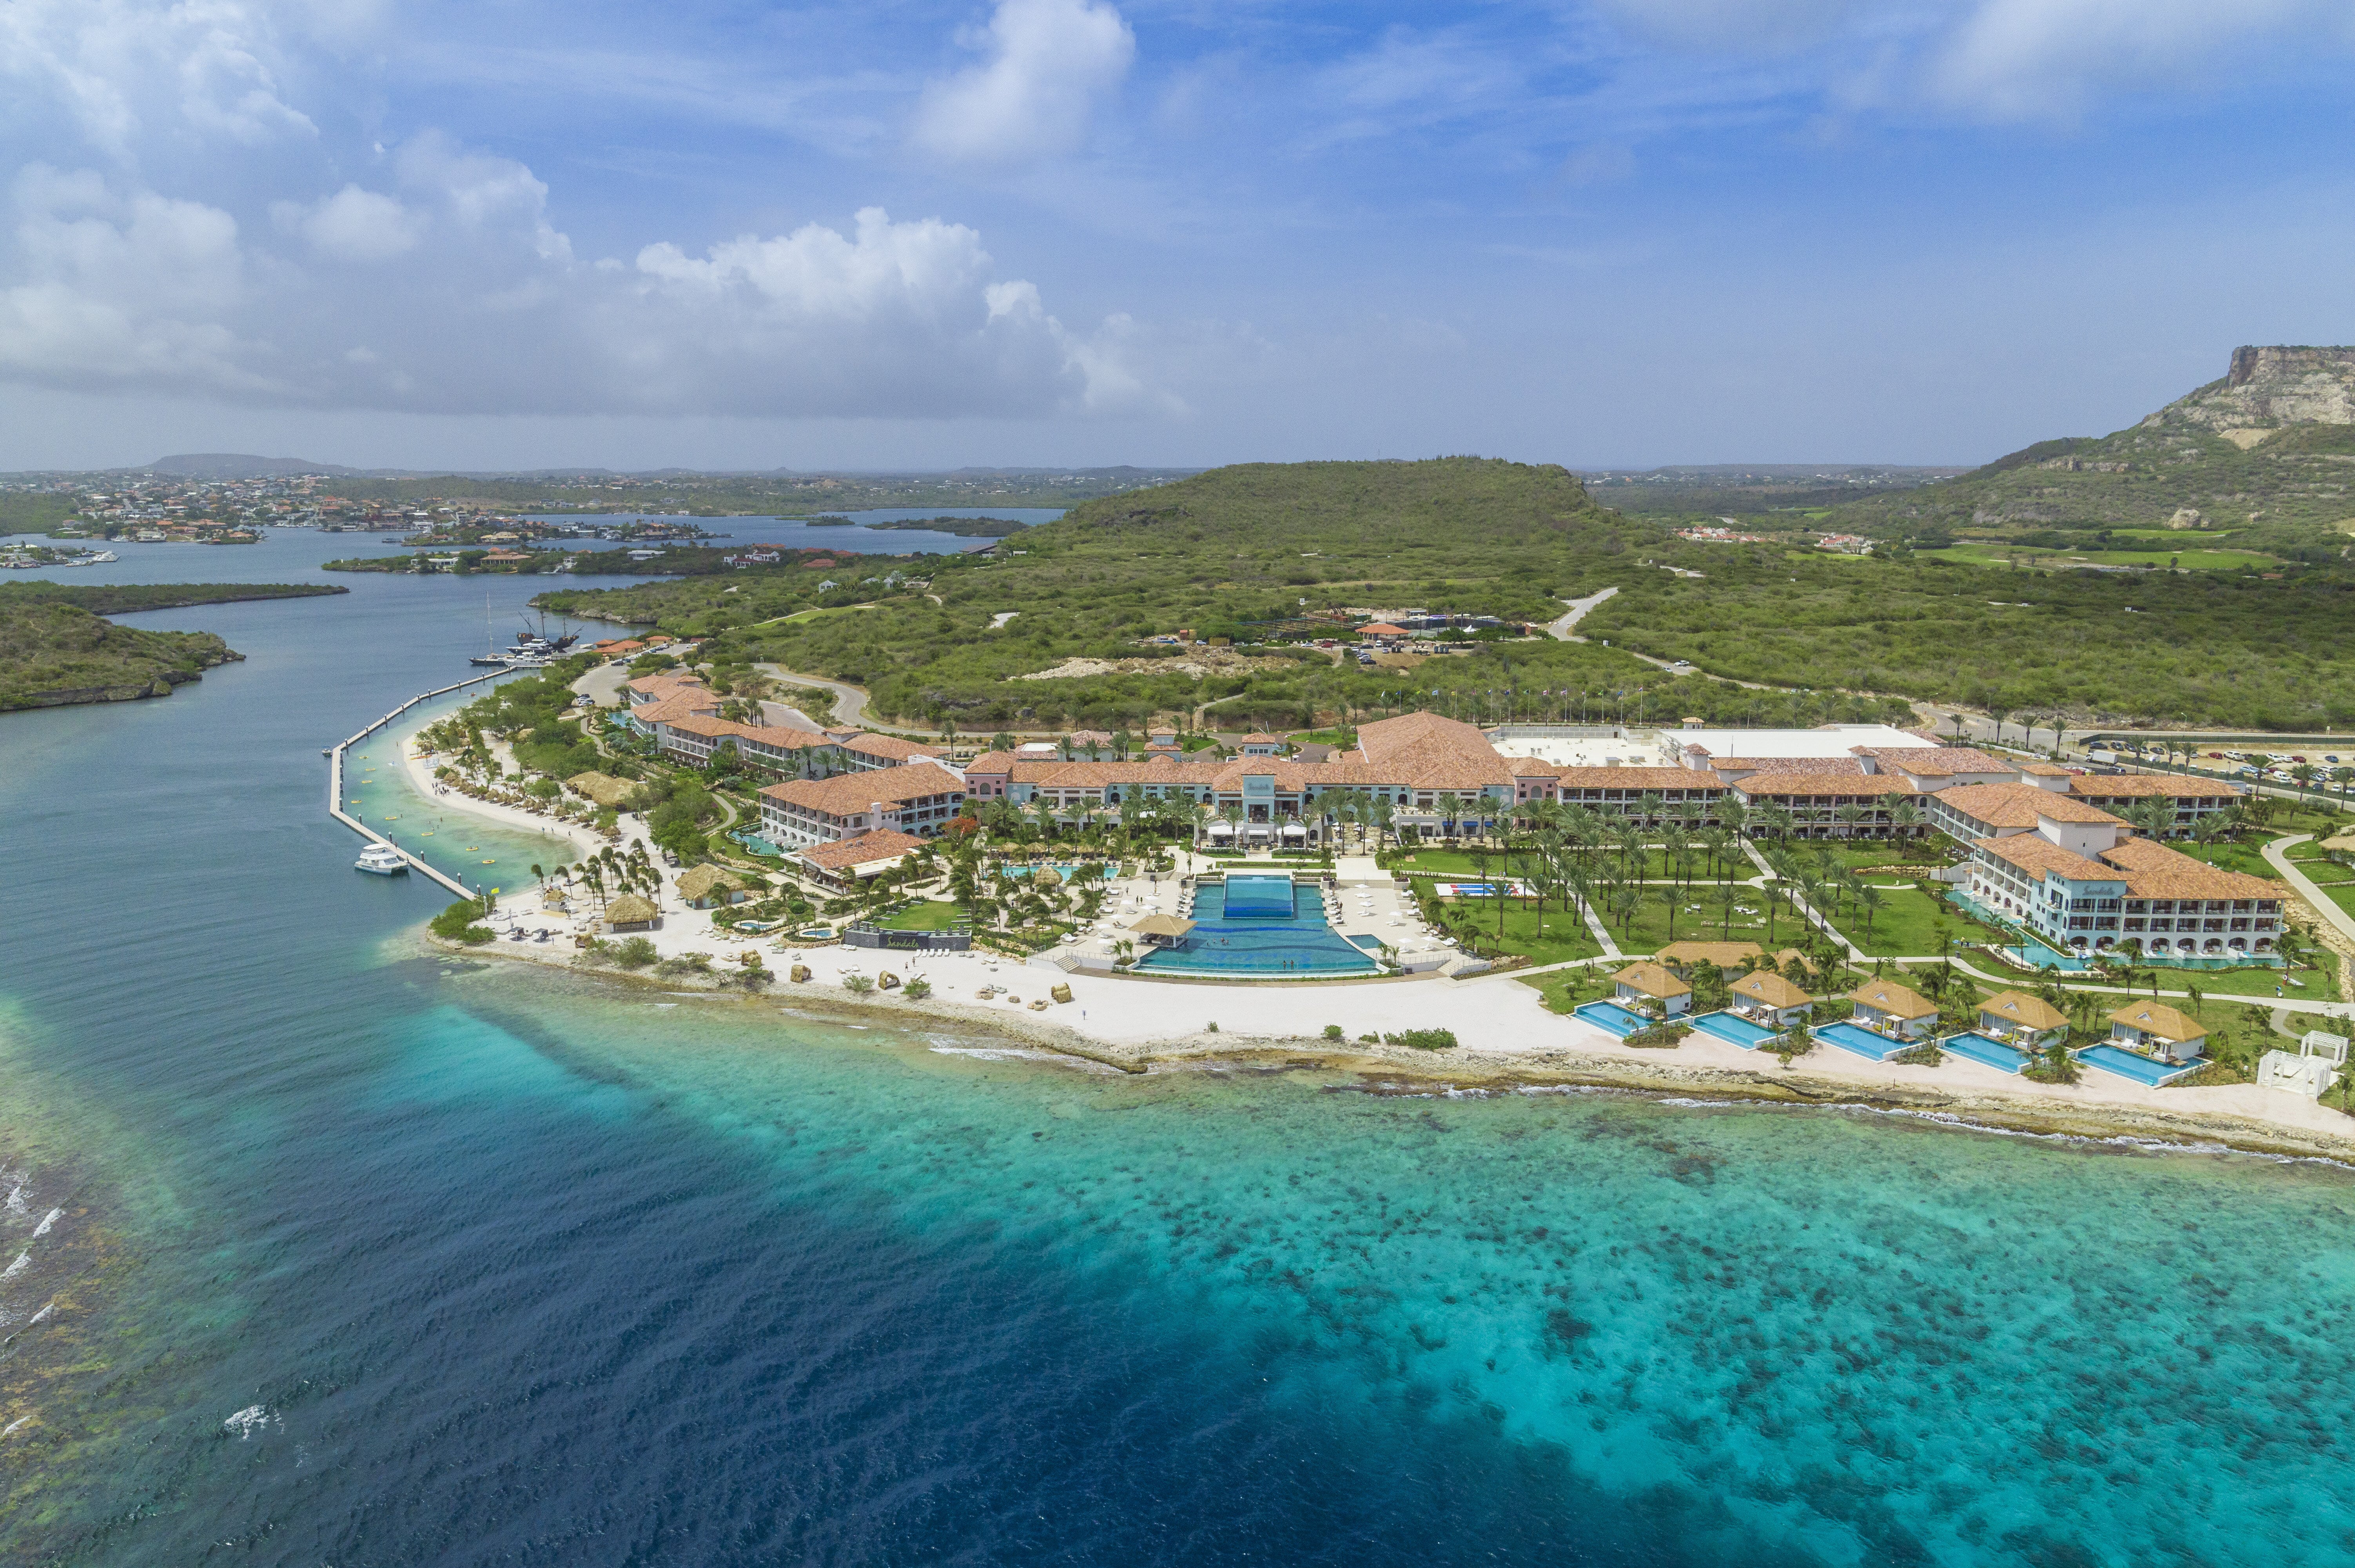 How Do You Fly To Curaçao From The UK?